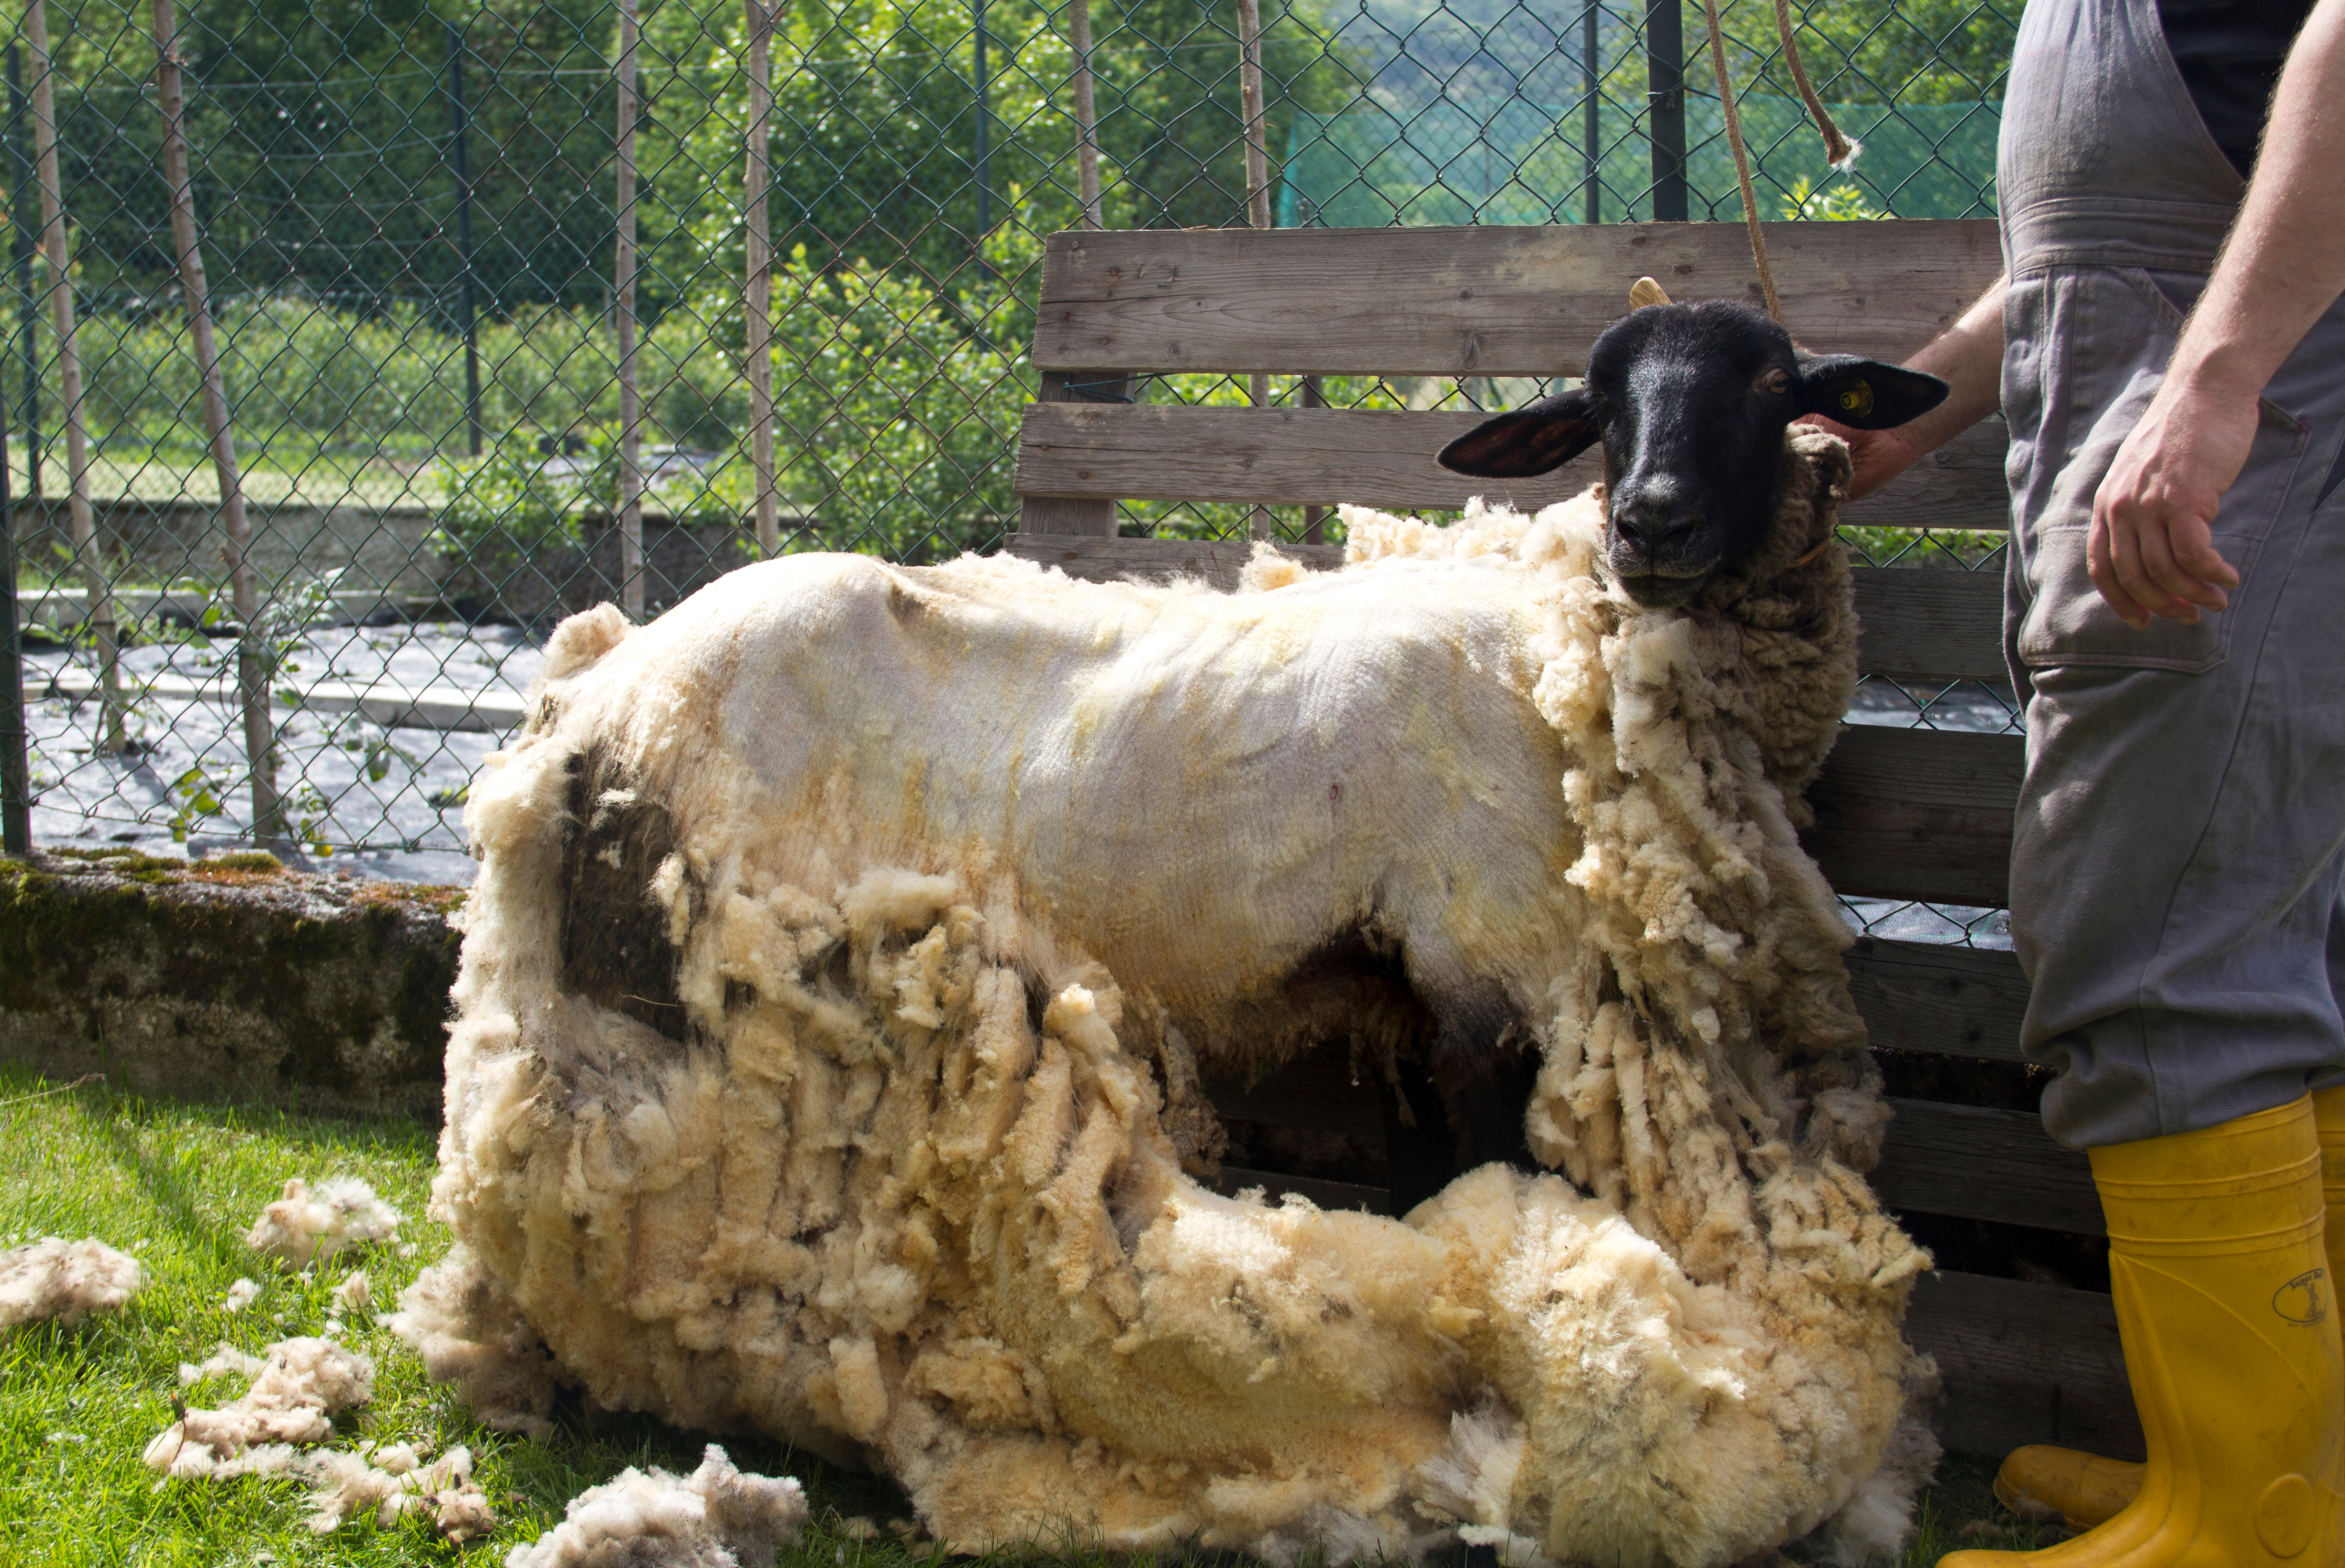 A sheep being sheered